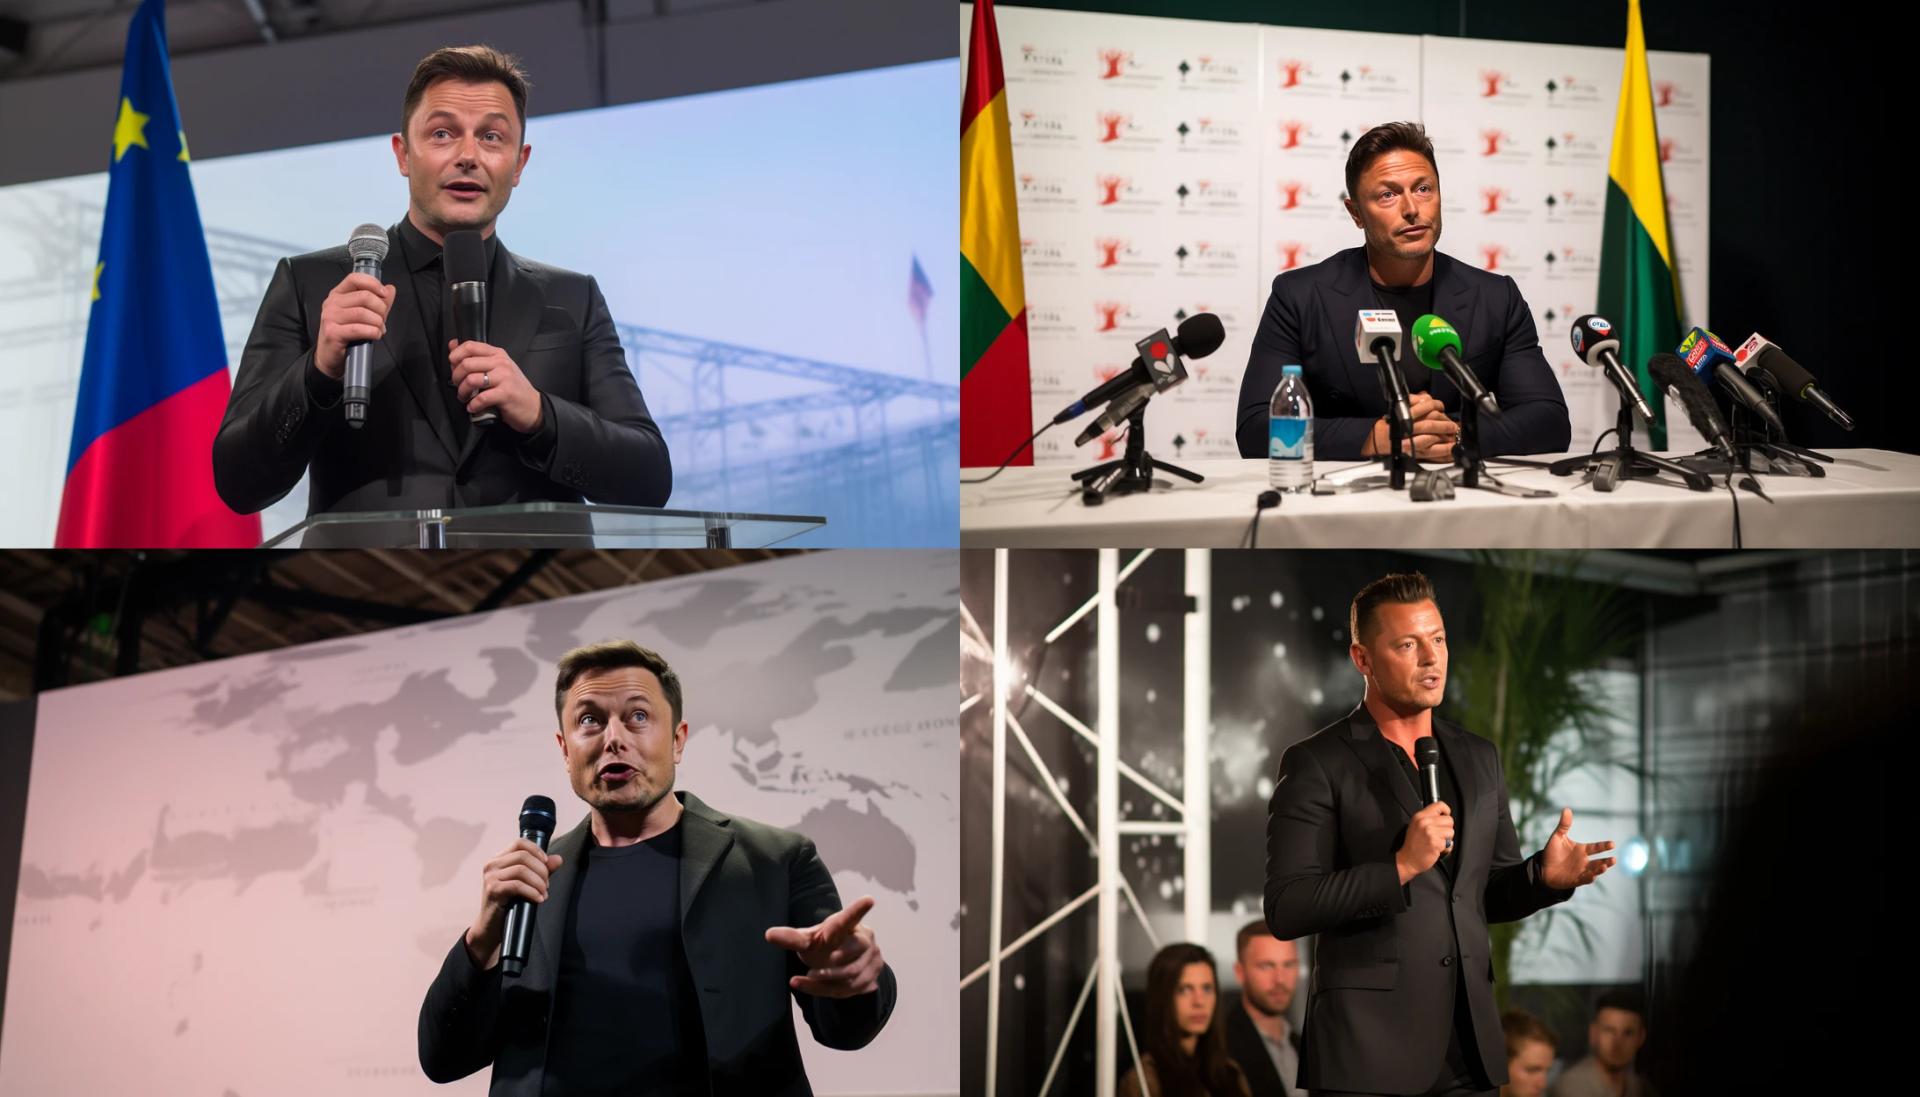 Elon Musk speaking at a press conference regarding the migrant crisis in Europe. Photo taken with Nikon D850.